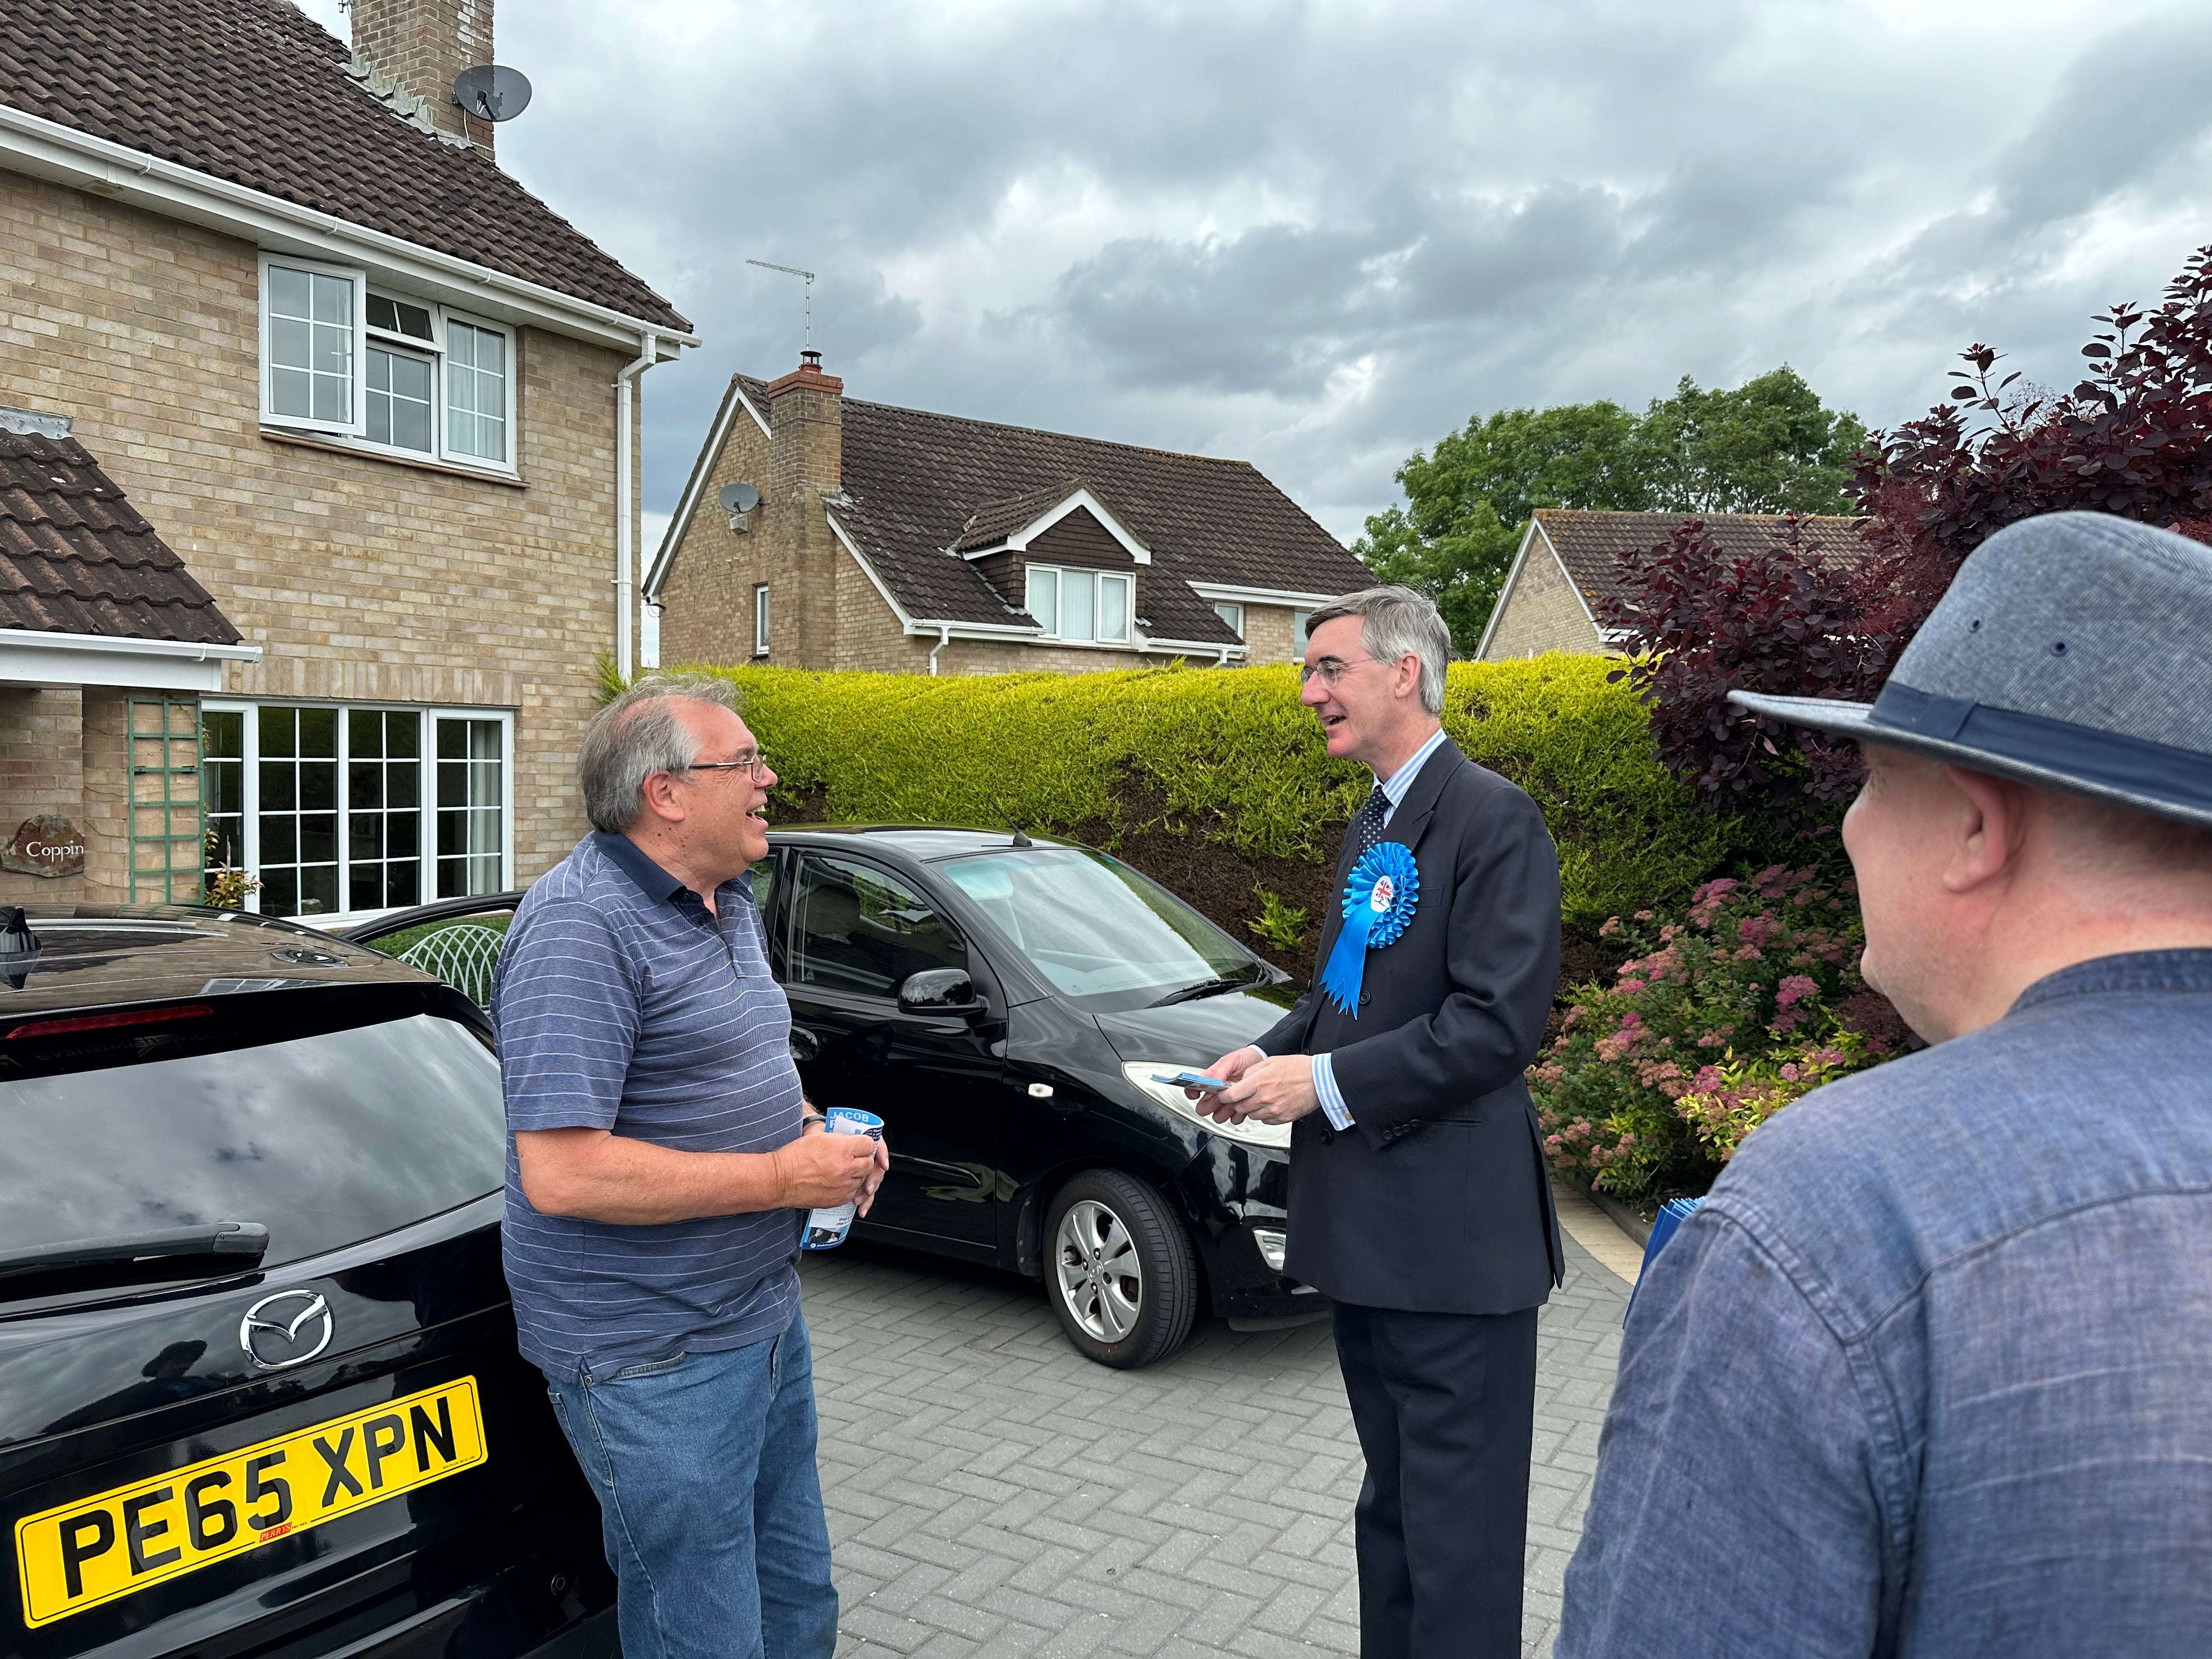 Martyn Chugg lives in former Tory MP Chris Skidmore’s old home. He shares a joke with Rees-Mogg about putting up a blue plaque when Skidmore becomes prime minister